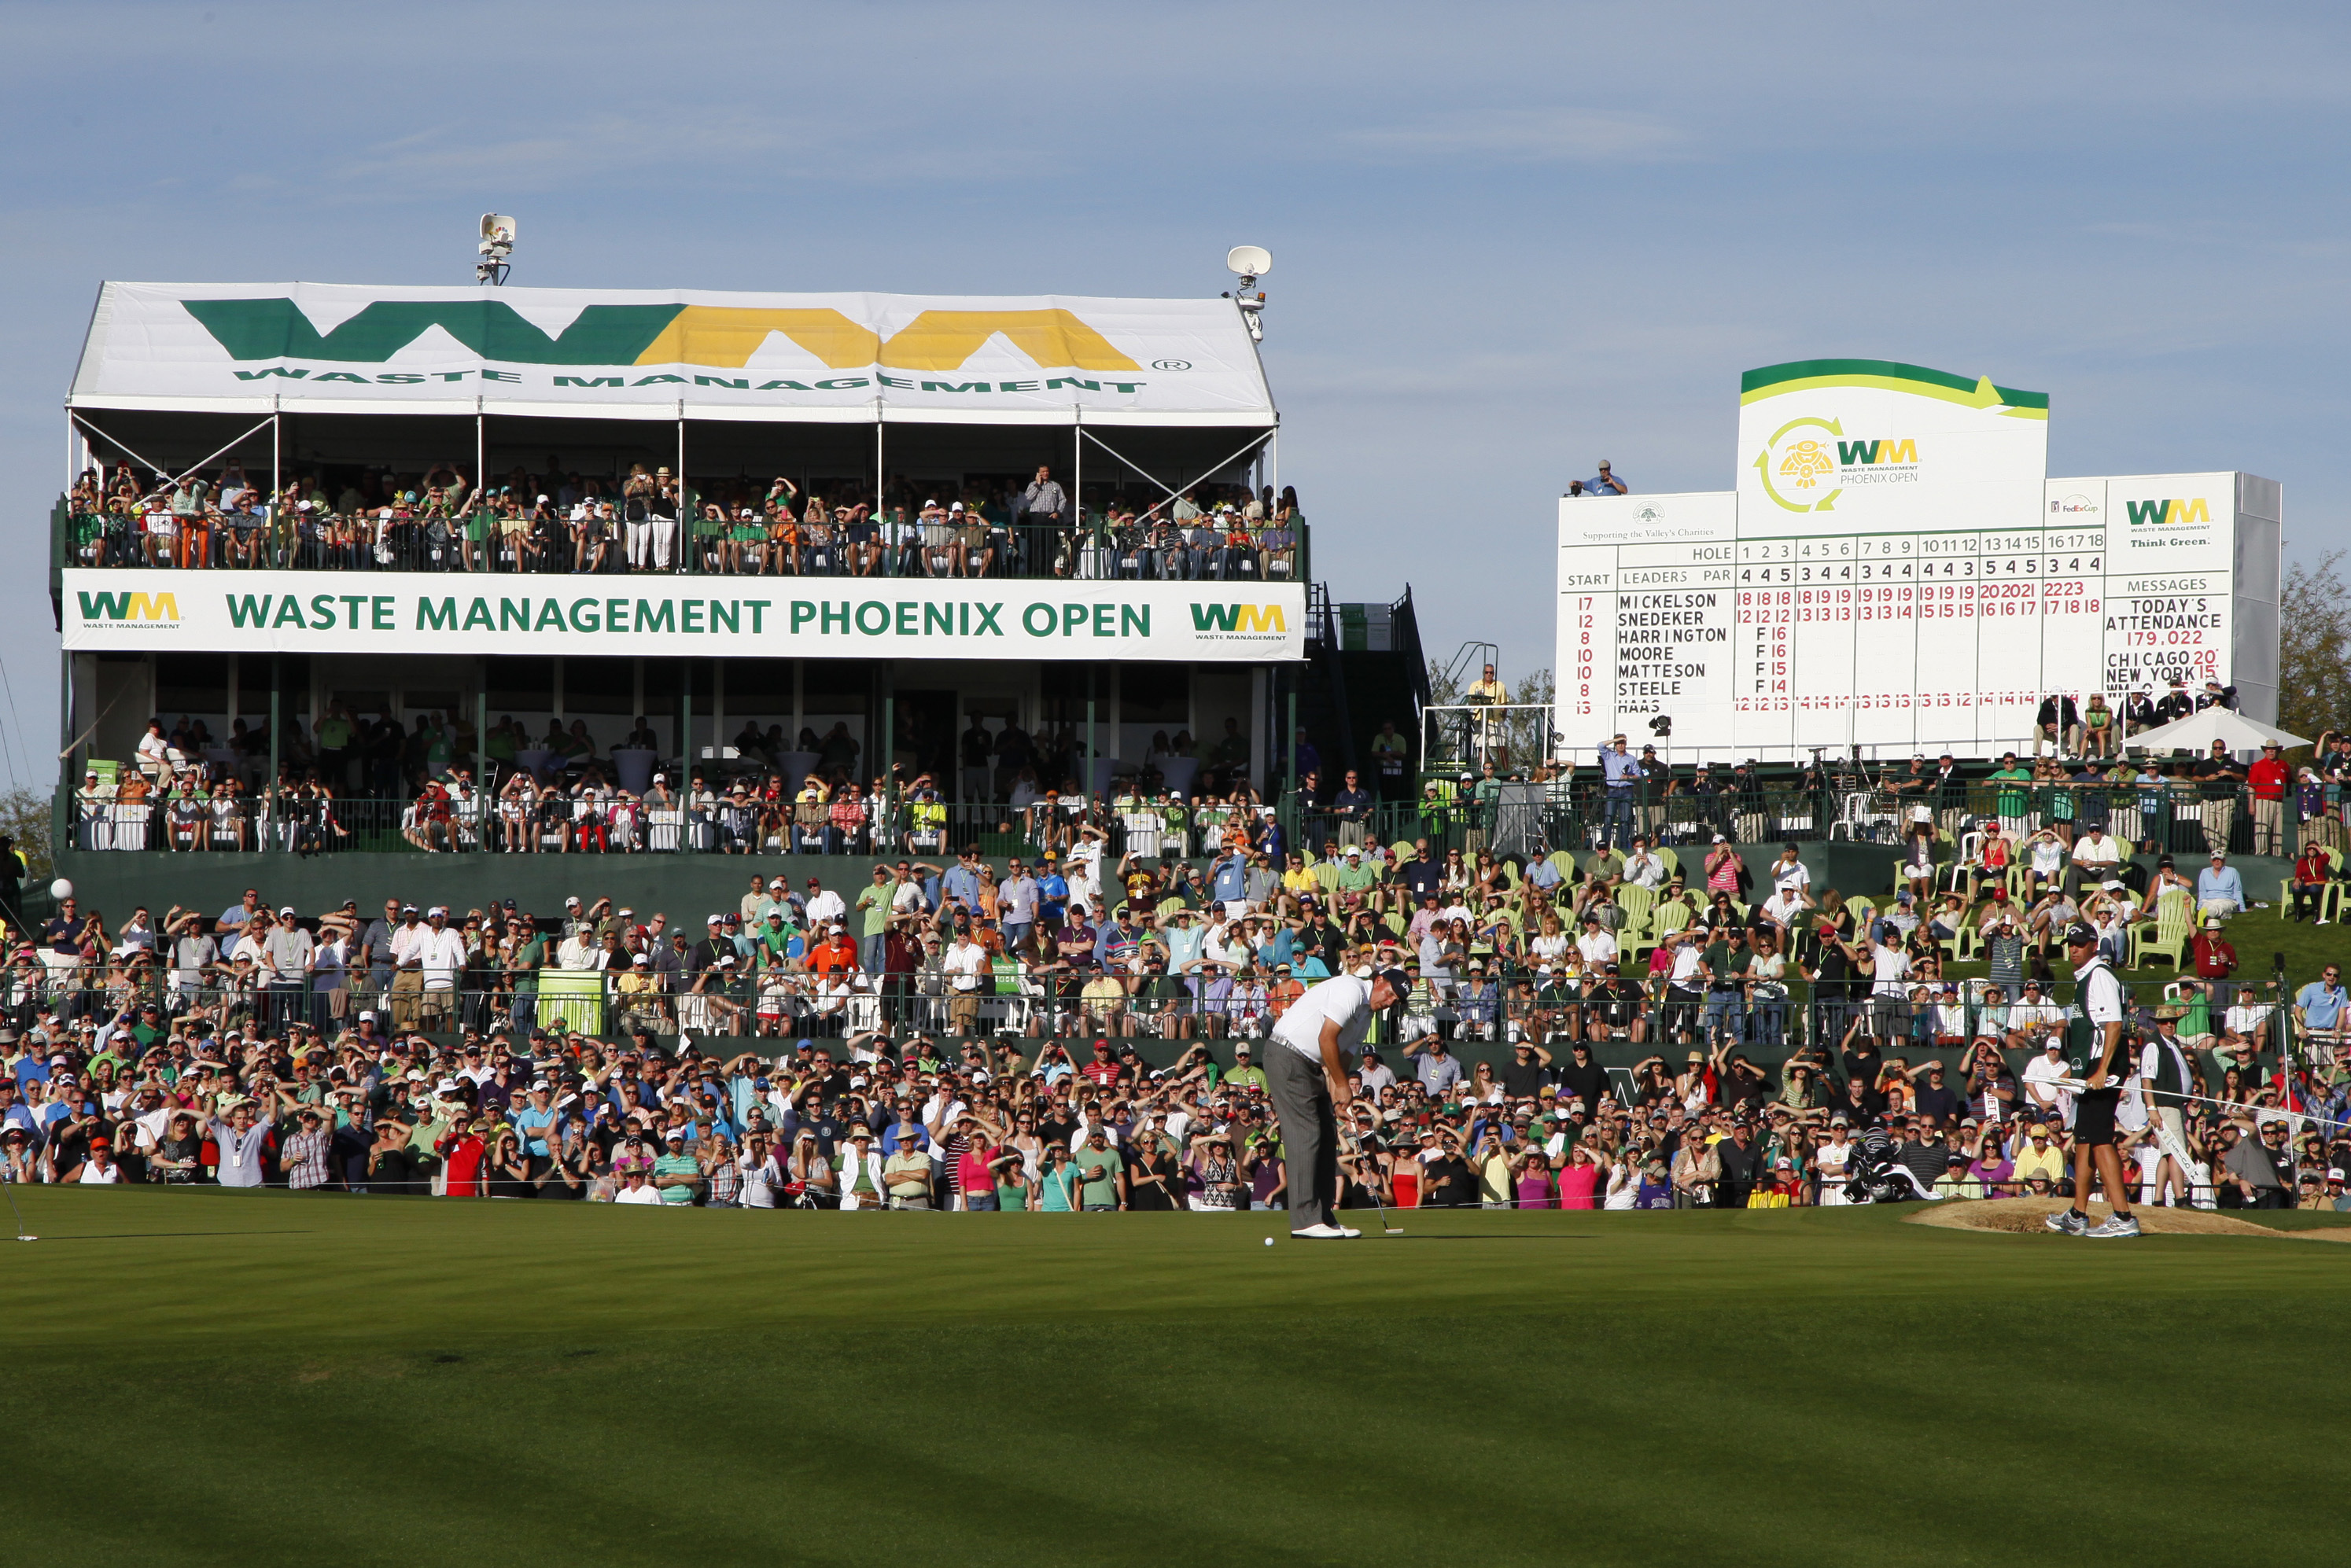 Waste Management Phoenix Open 2014 Tee Times, Date and TV Schedule